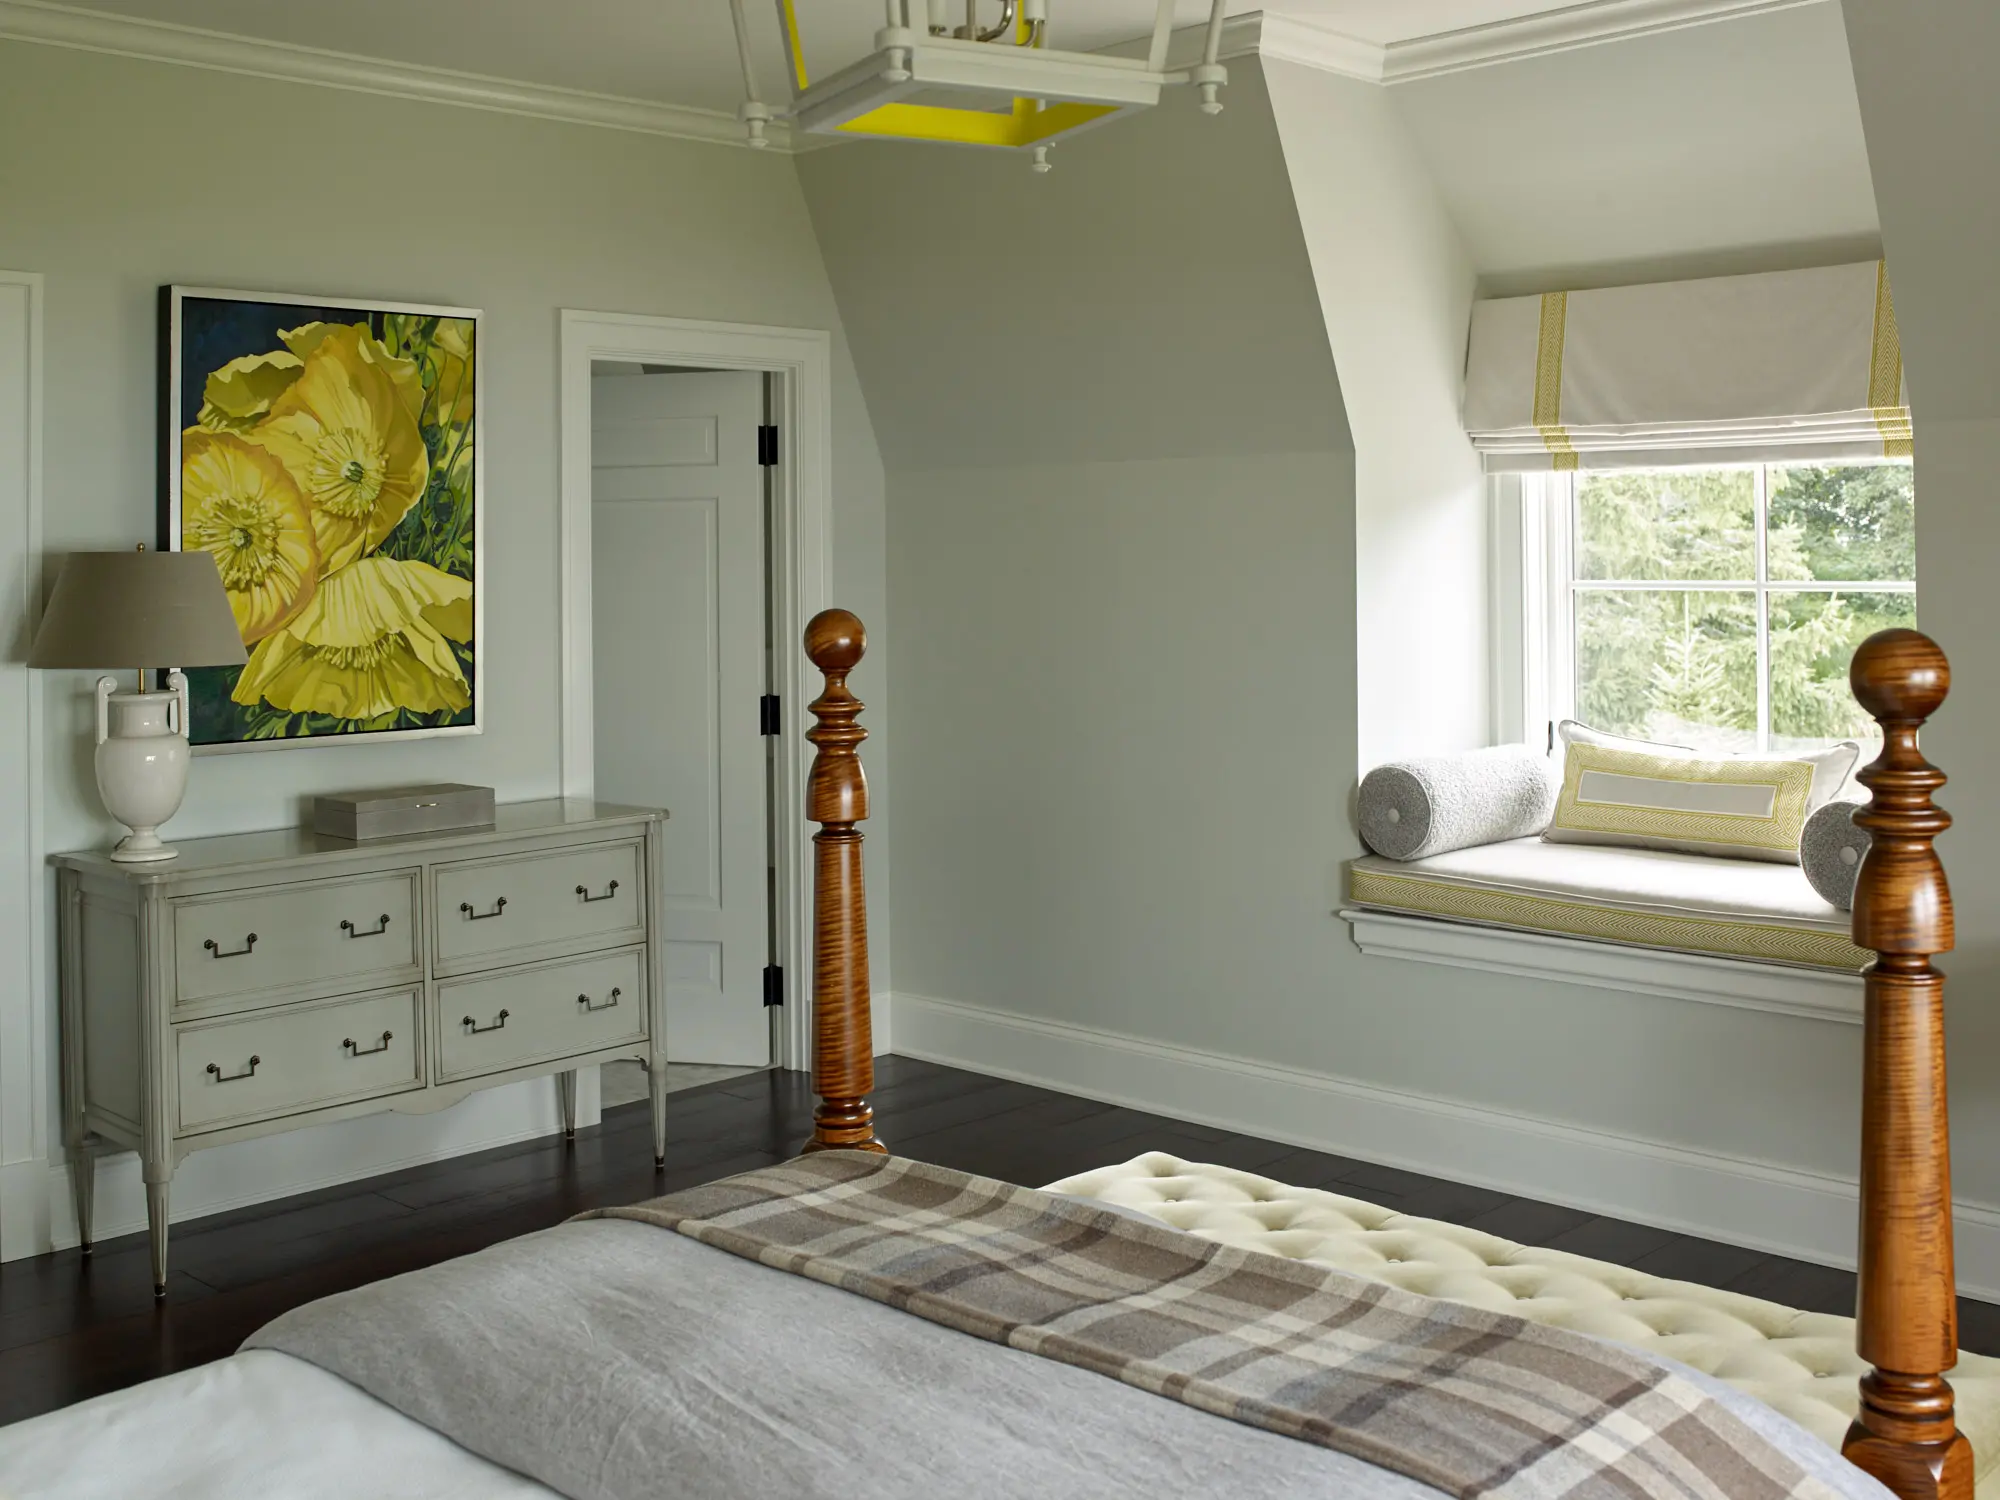 Spacious bright bedroom with yellow accents and a comfy window seat.